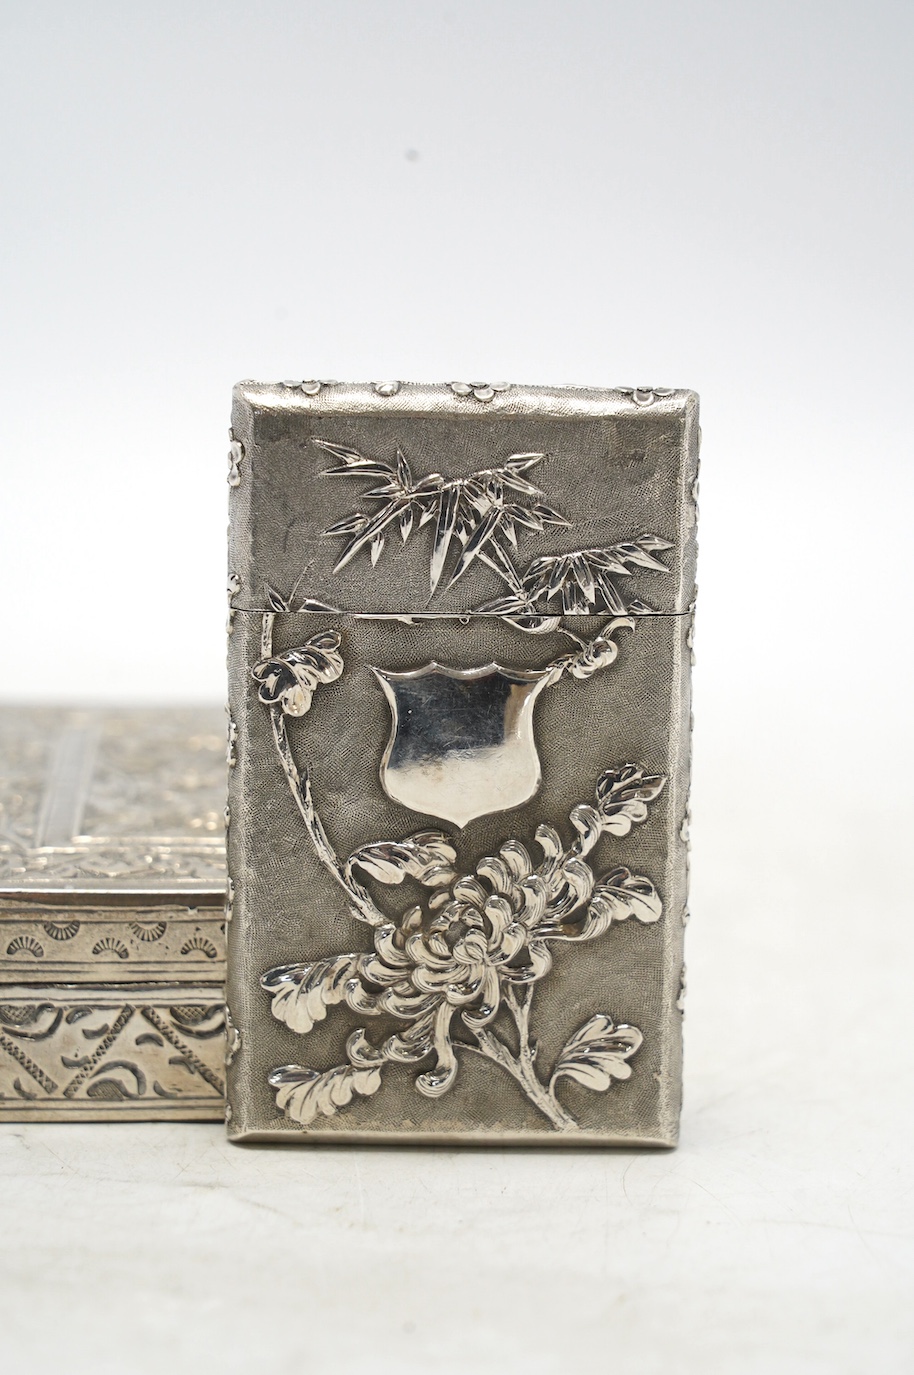 An early 20th century Chinese Export white metal card case by Wang Hing, 84mm, together with a Chinese white metal box with hinged cover. Condition - fair to good